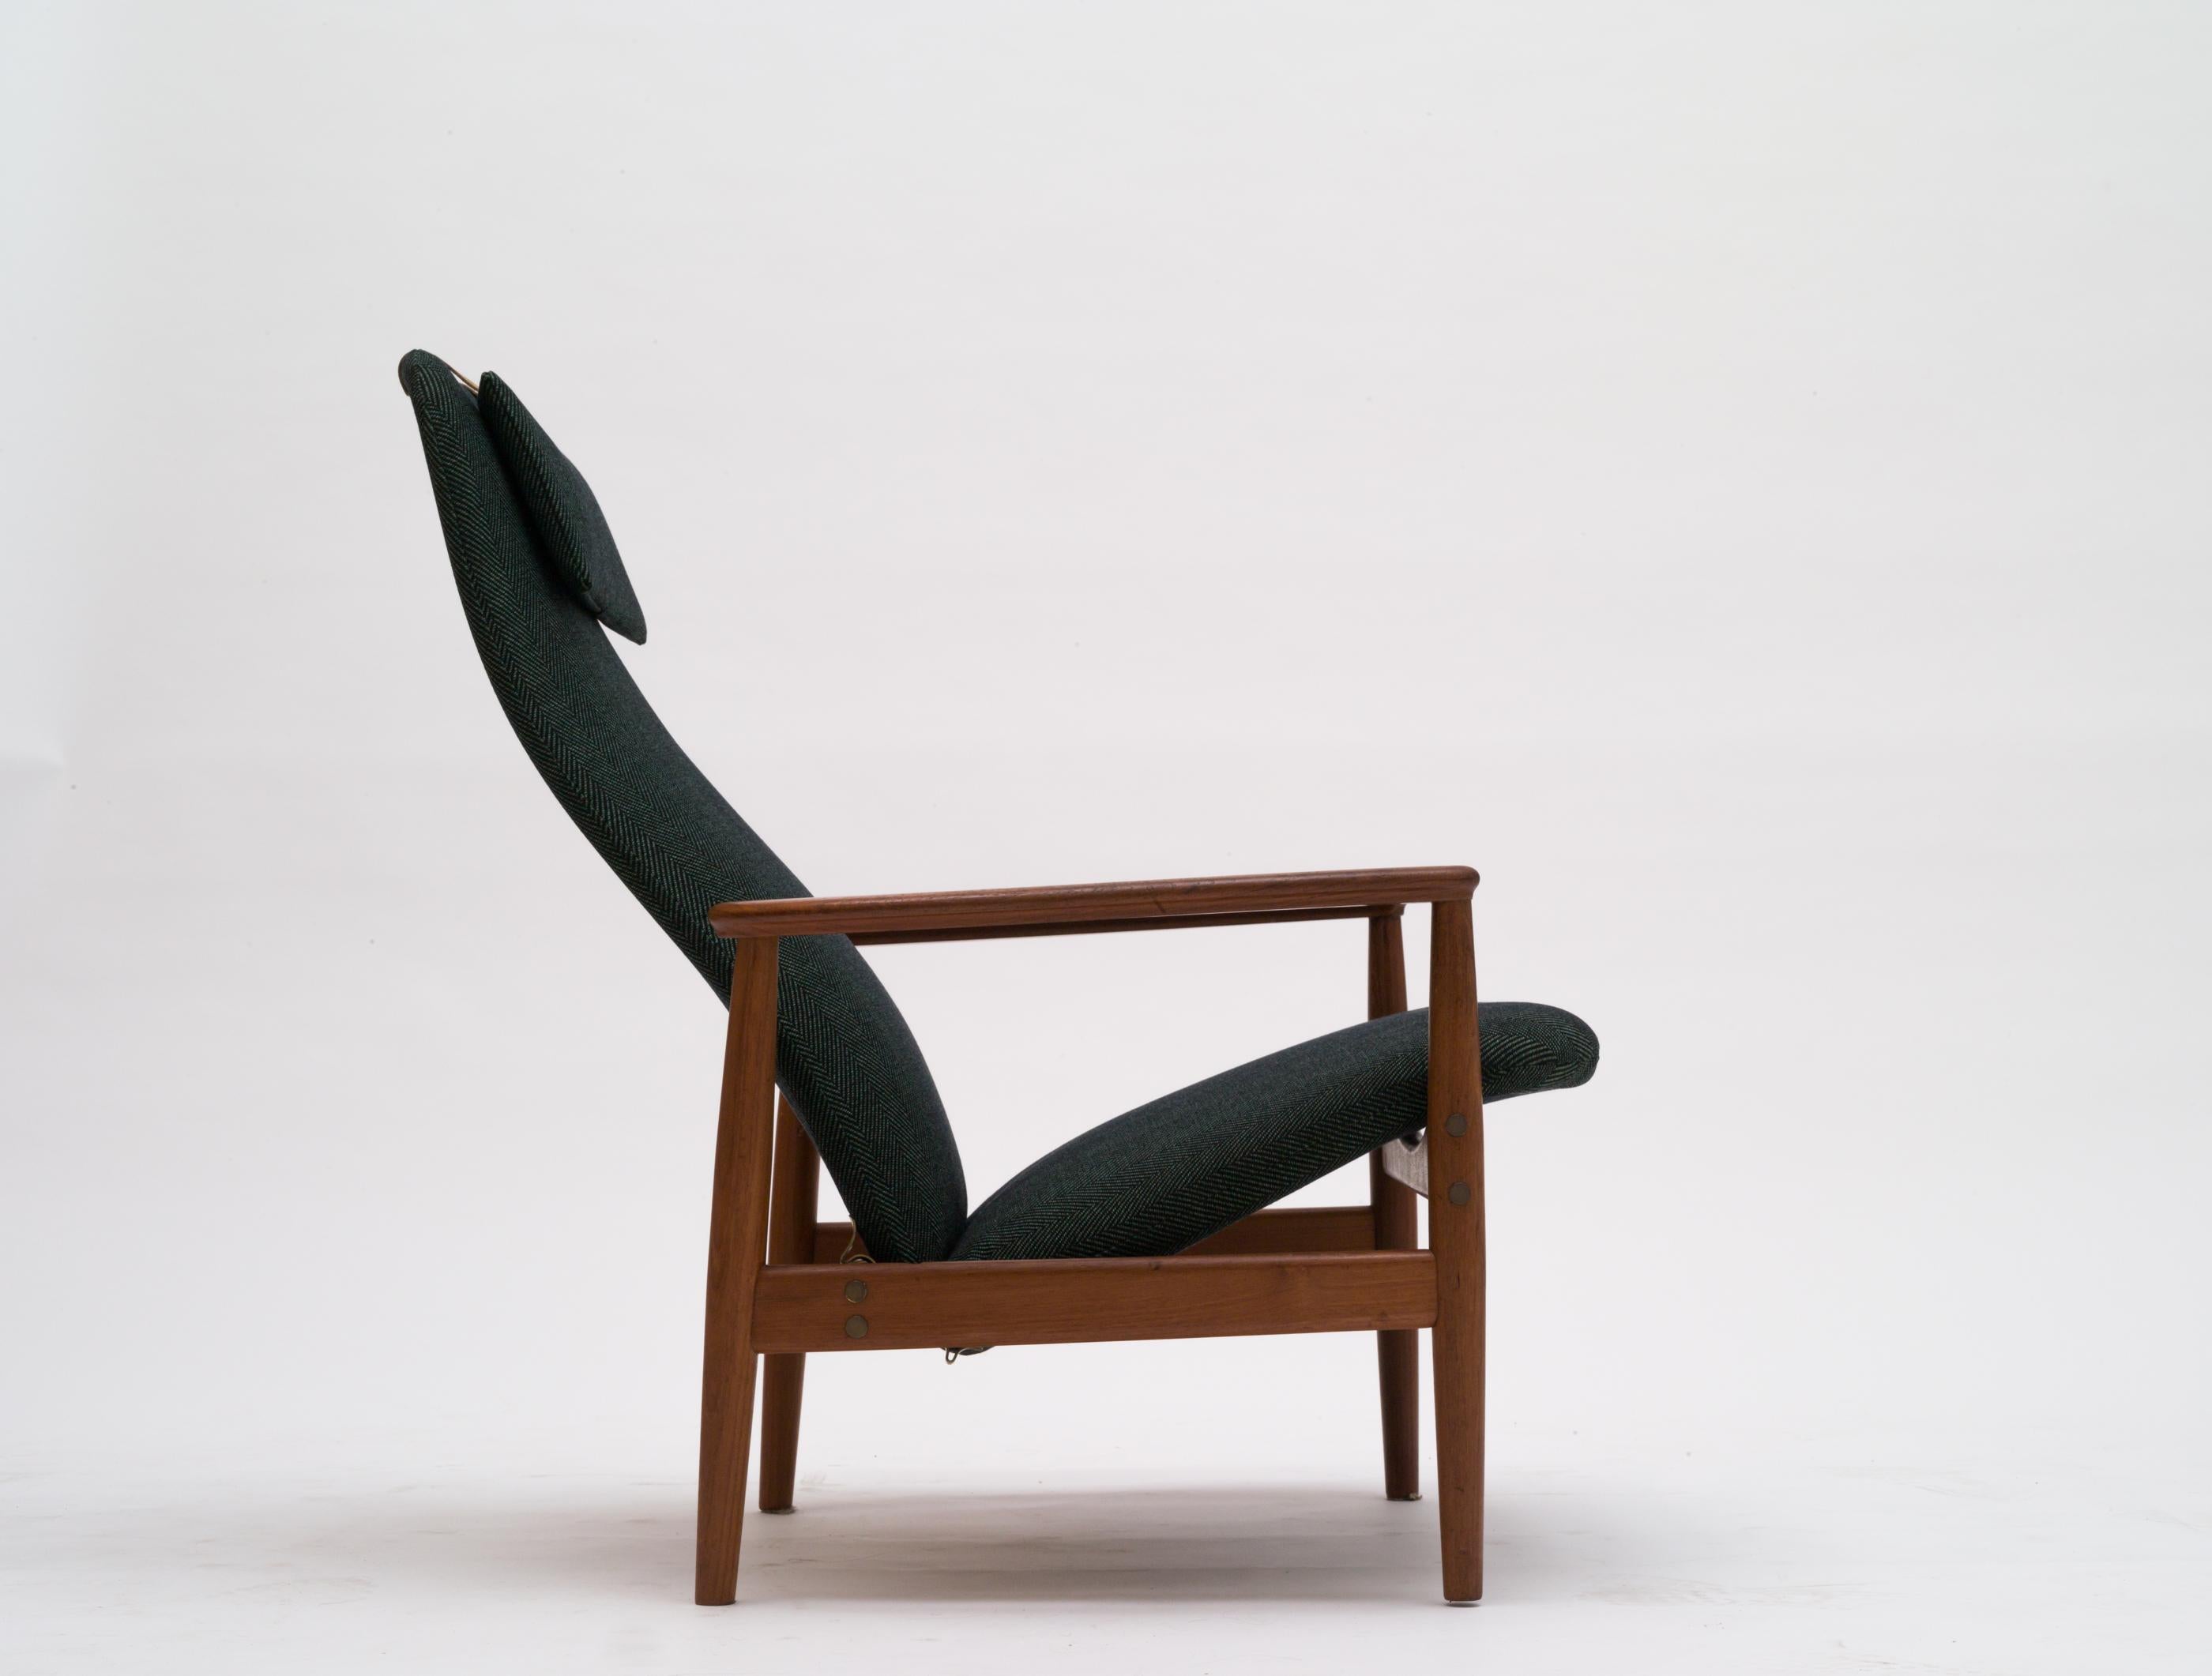 Teak armchair designed by Alf Svensson for Ljungs Industrier, model Contour. Reclining in two positions. New reupholstery in green/dark blue 